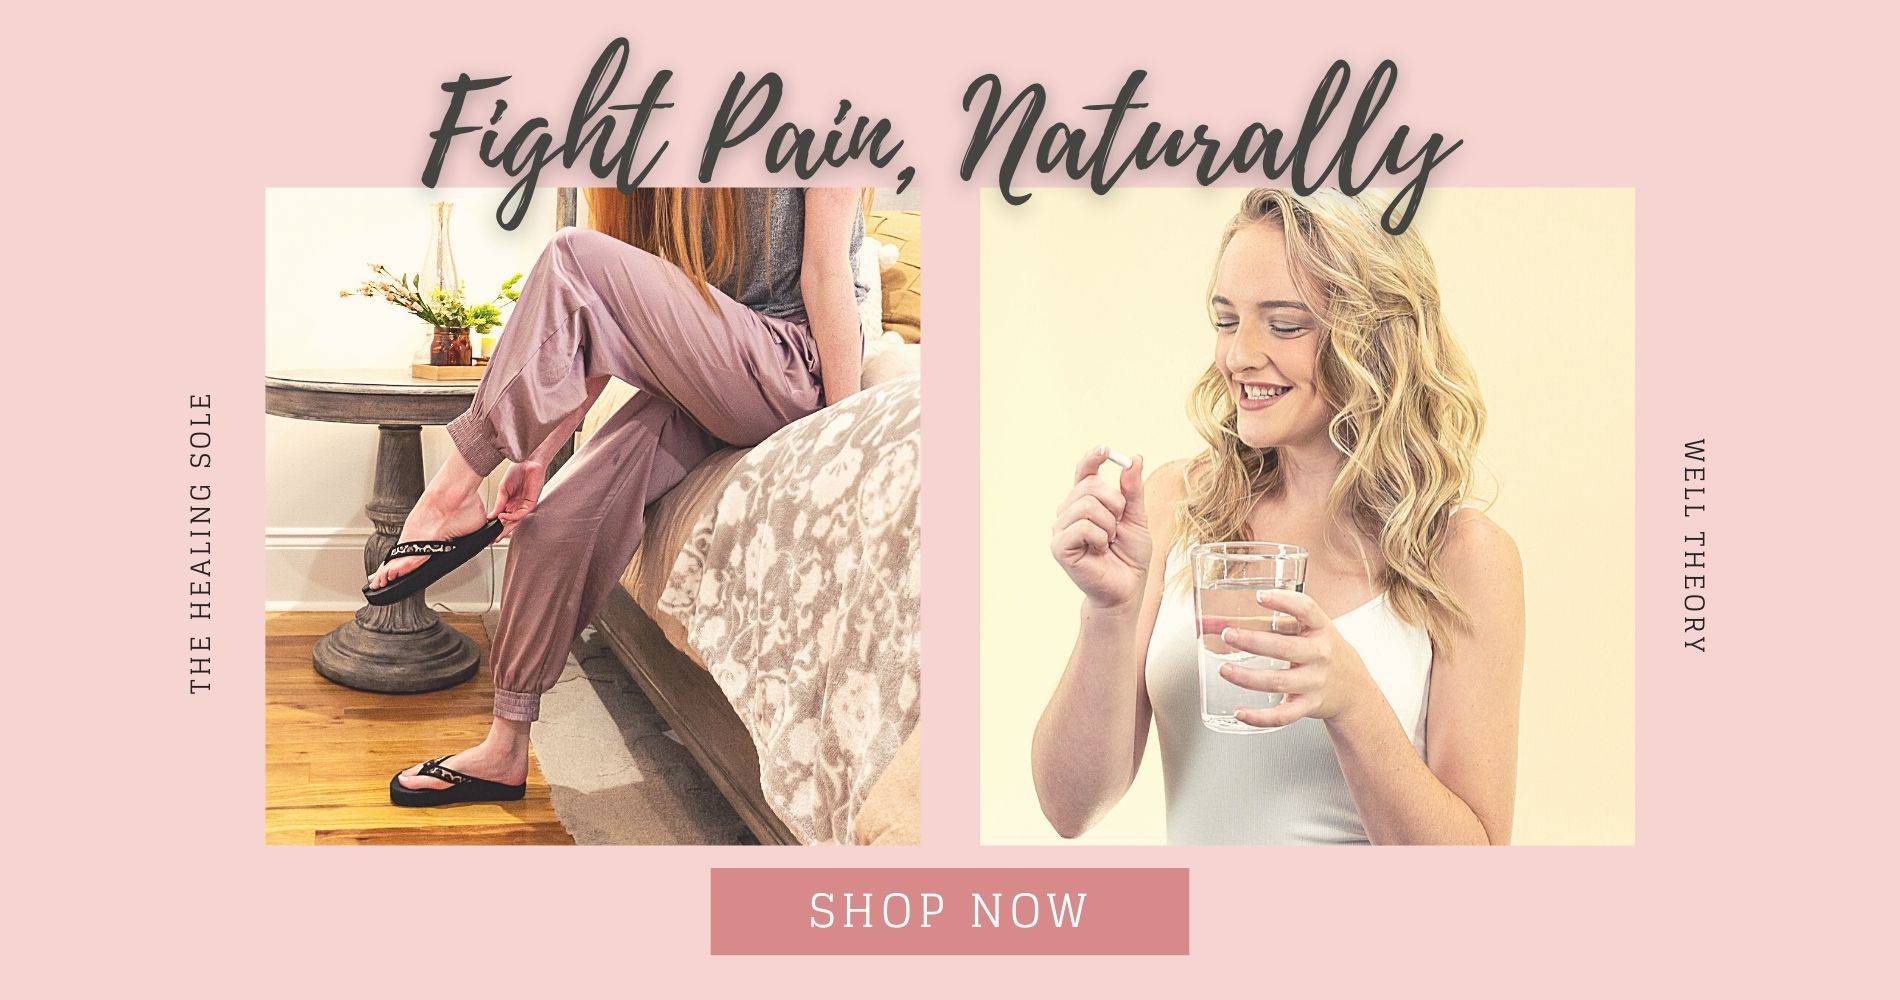 Fight Pain, Naturally